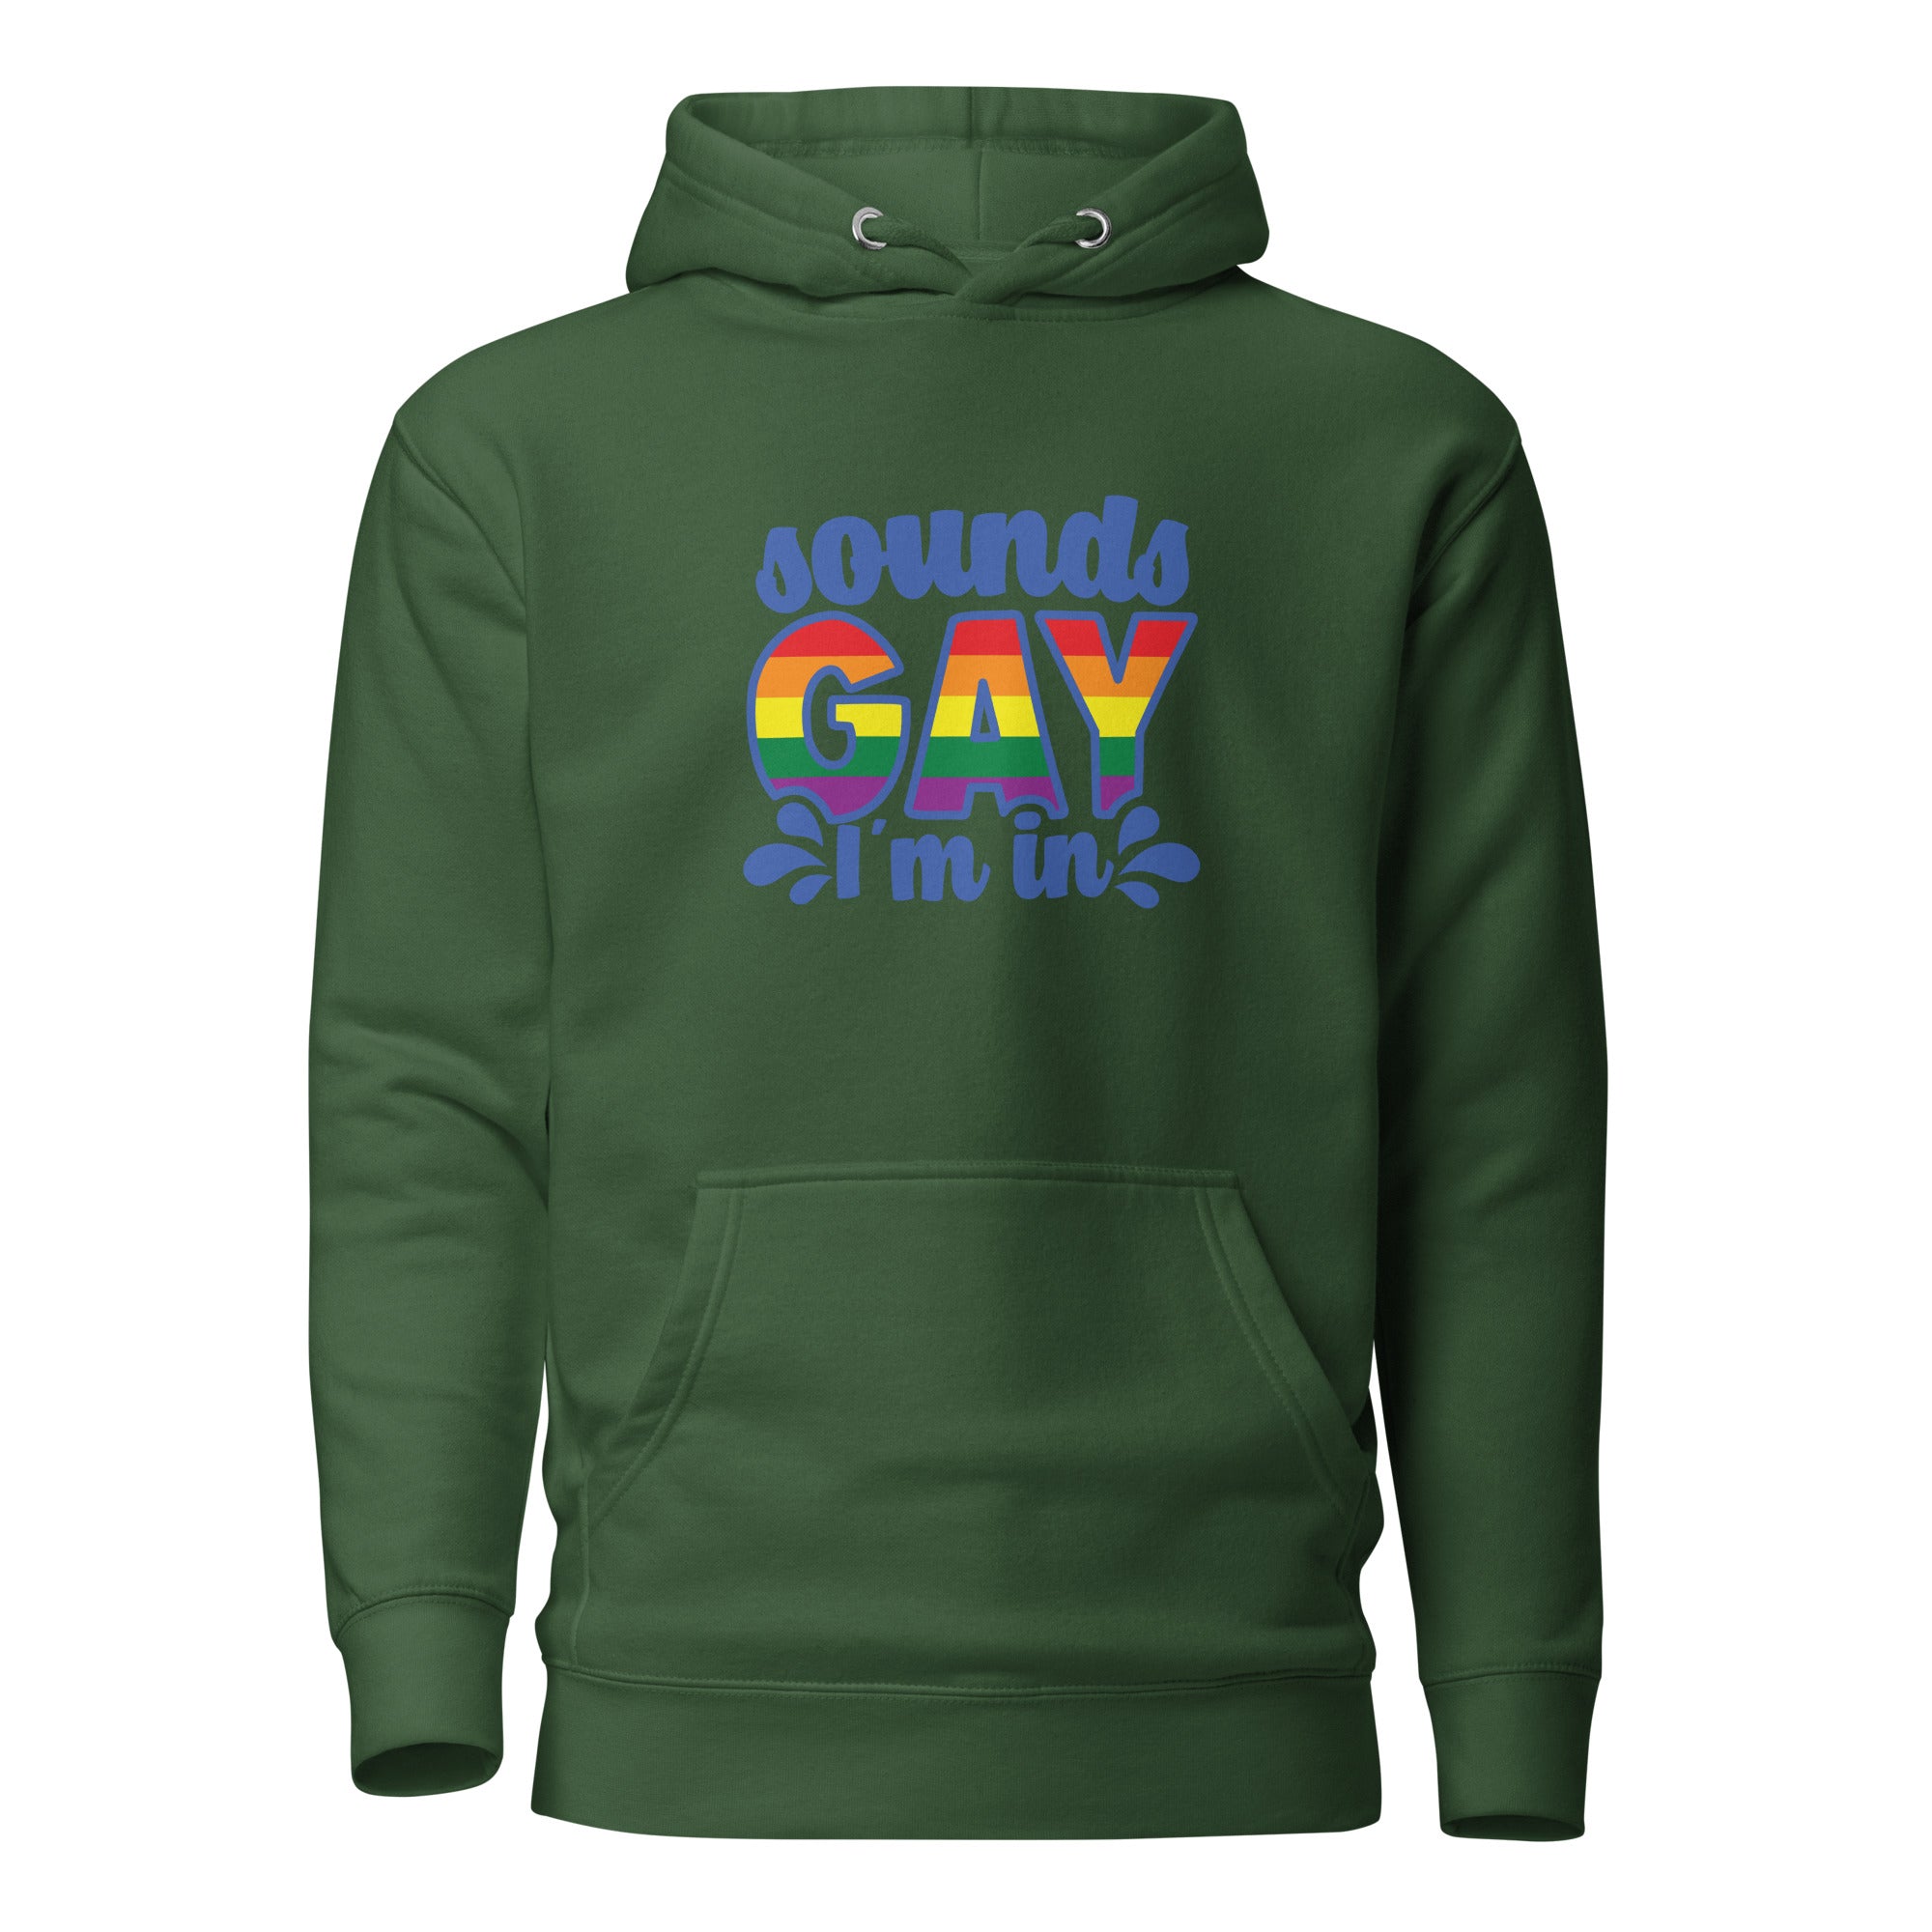 Unisex Hoodie- Sounds gay I'm in